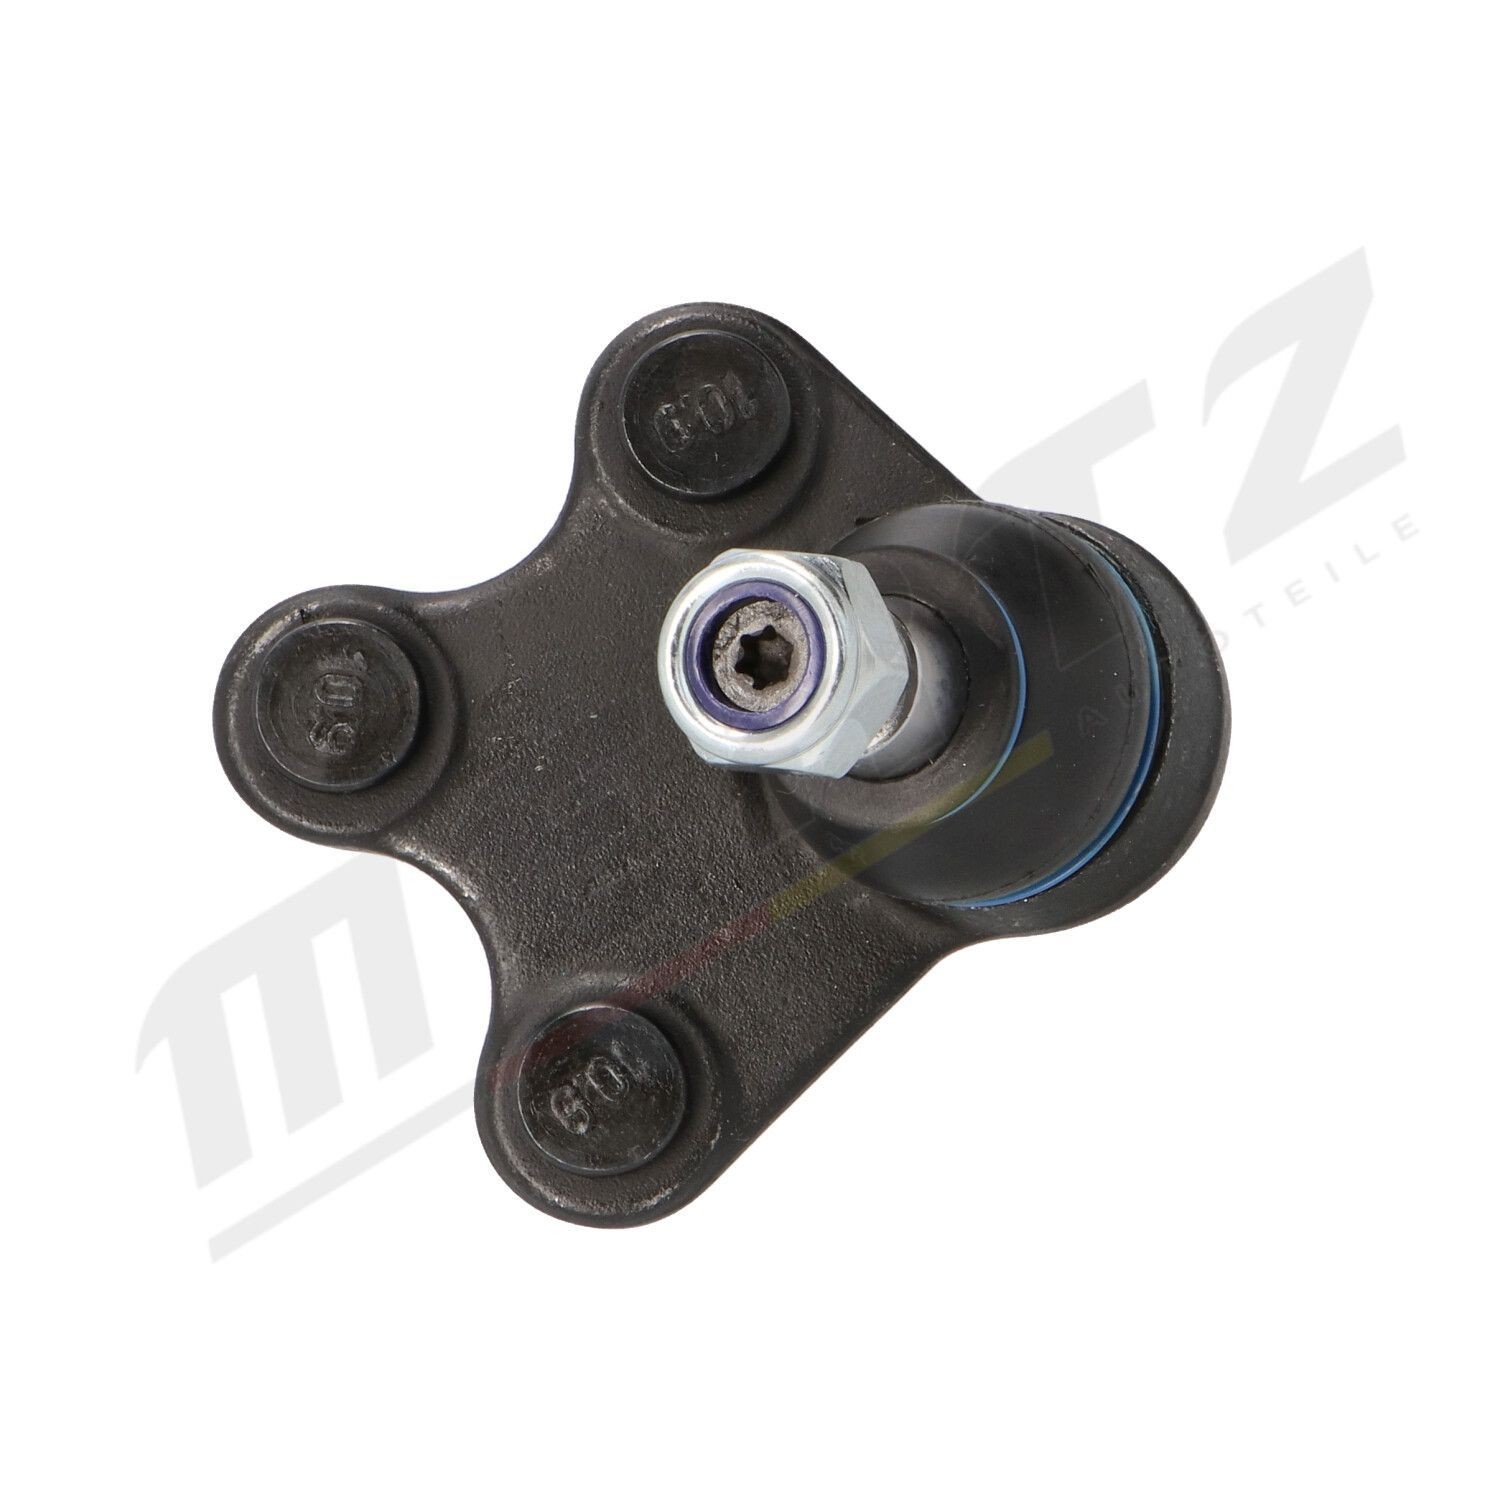 MS0872 Ball joint suspension arm MERTZ M-S0872 review and test